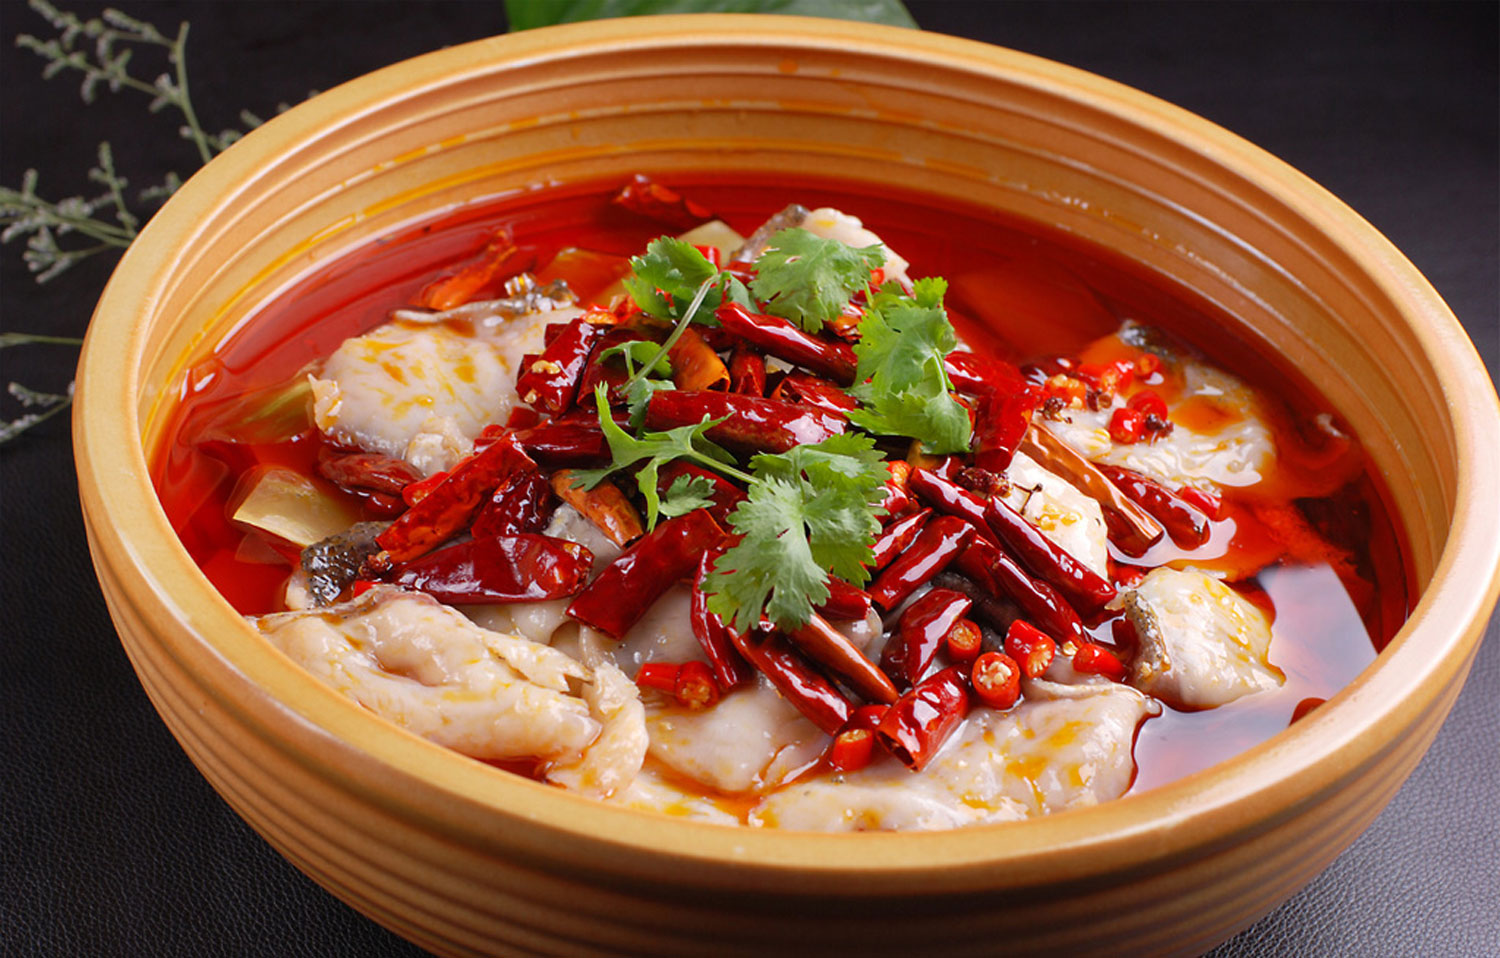 HOW LEE 川霸王 - Chinese food, Authentic Sichuan Cuisine, 正宗川菜